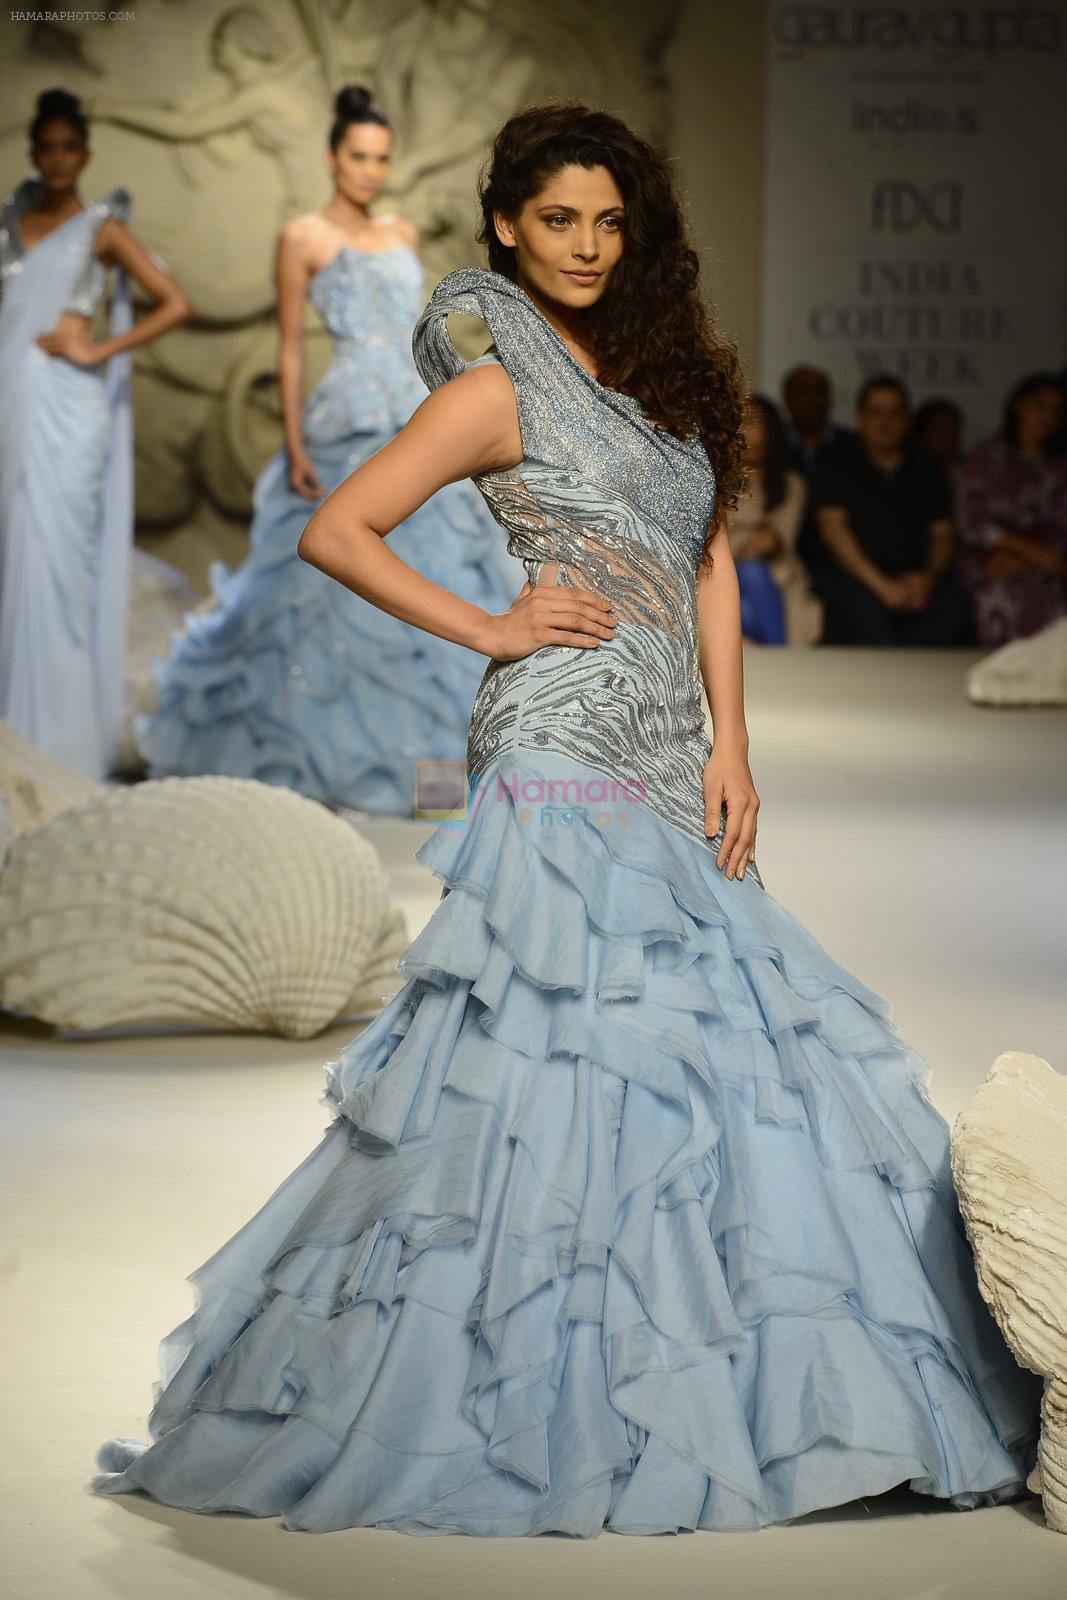 Saiyami Kher during showcase of Gaurav Gupta collection scape song at FDCI India Couture Week 2016 on 23 July 2016